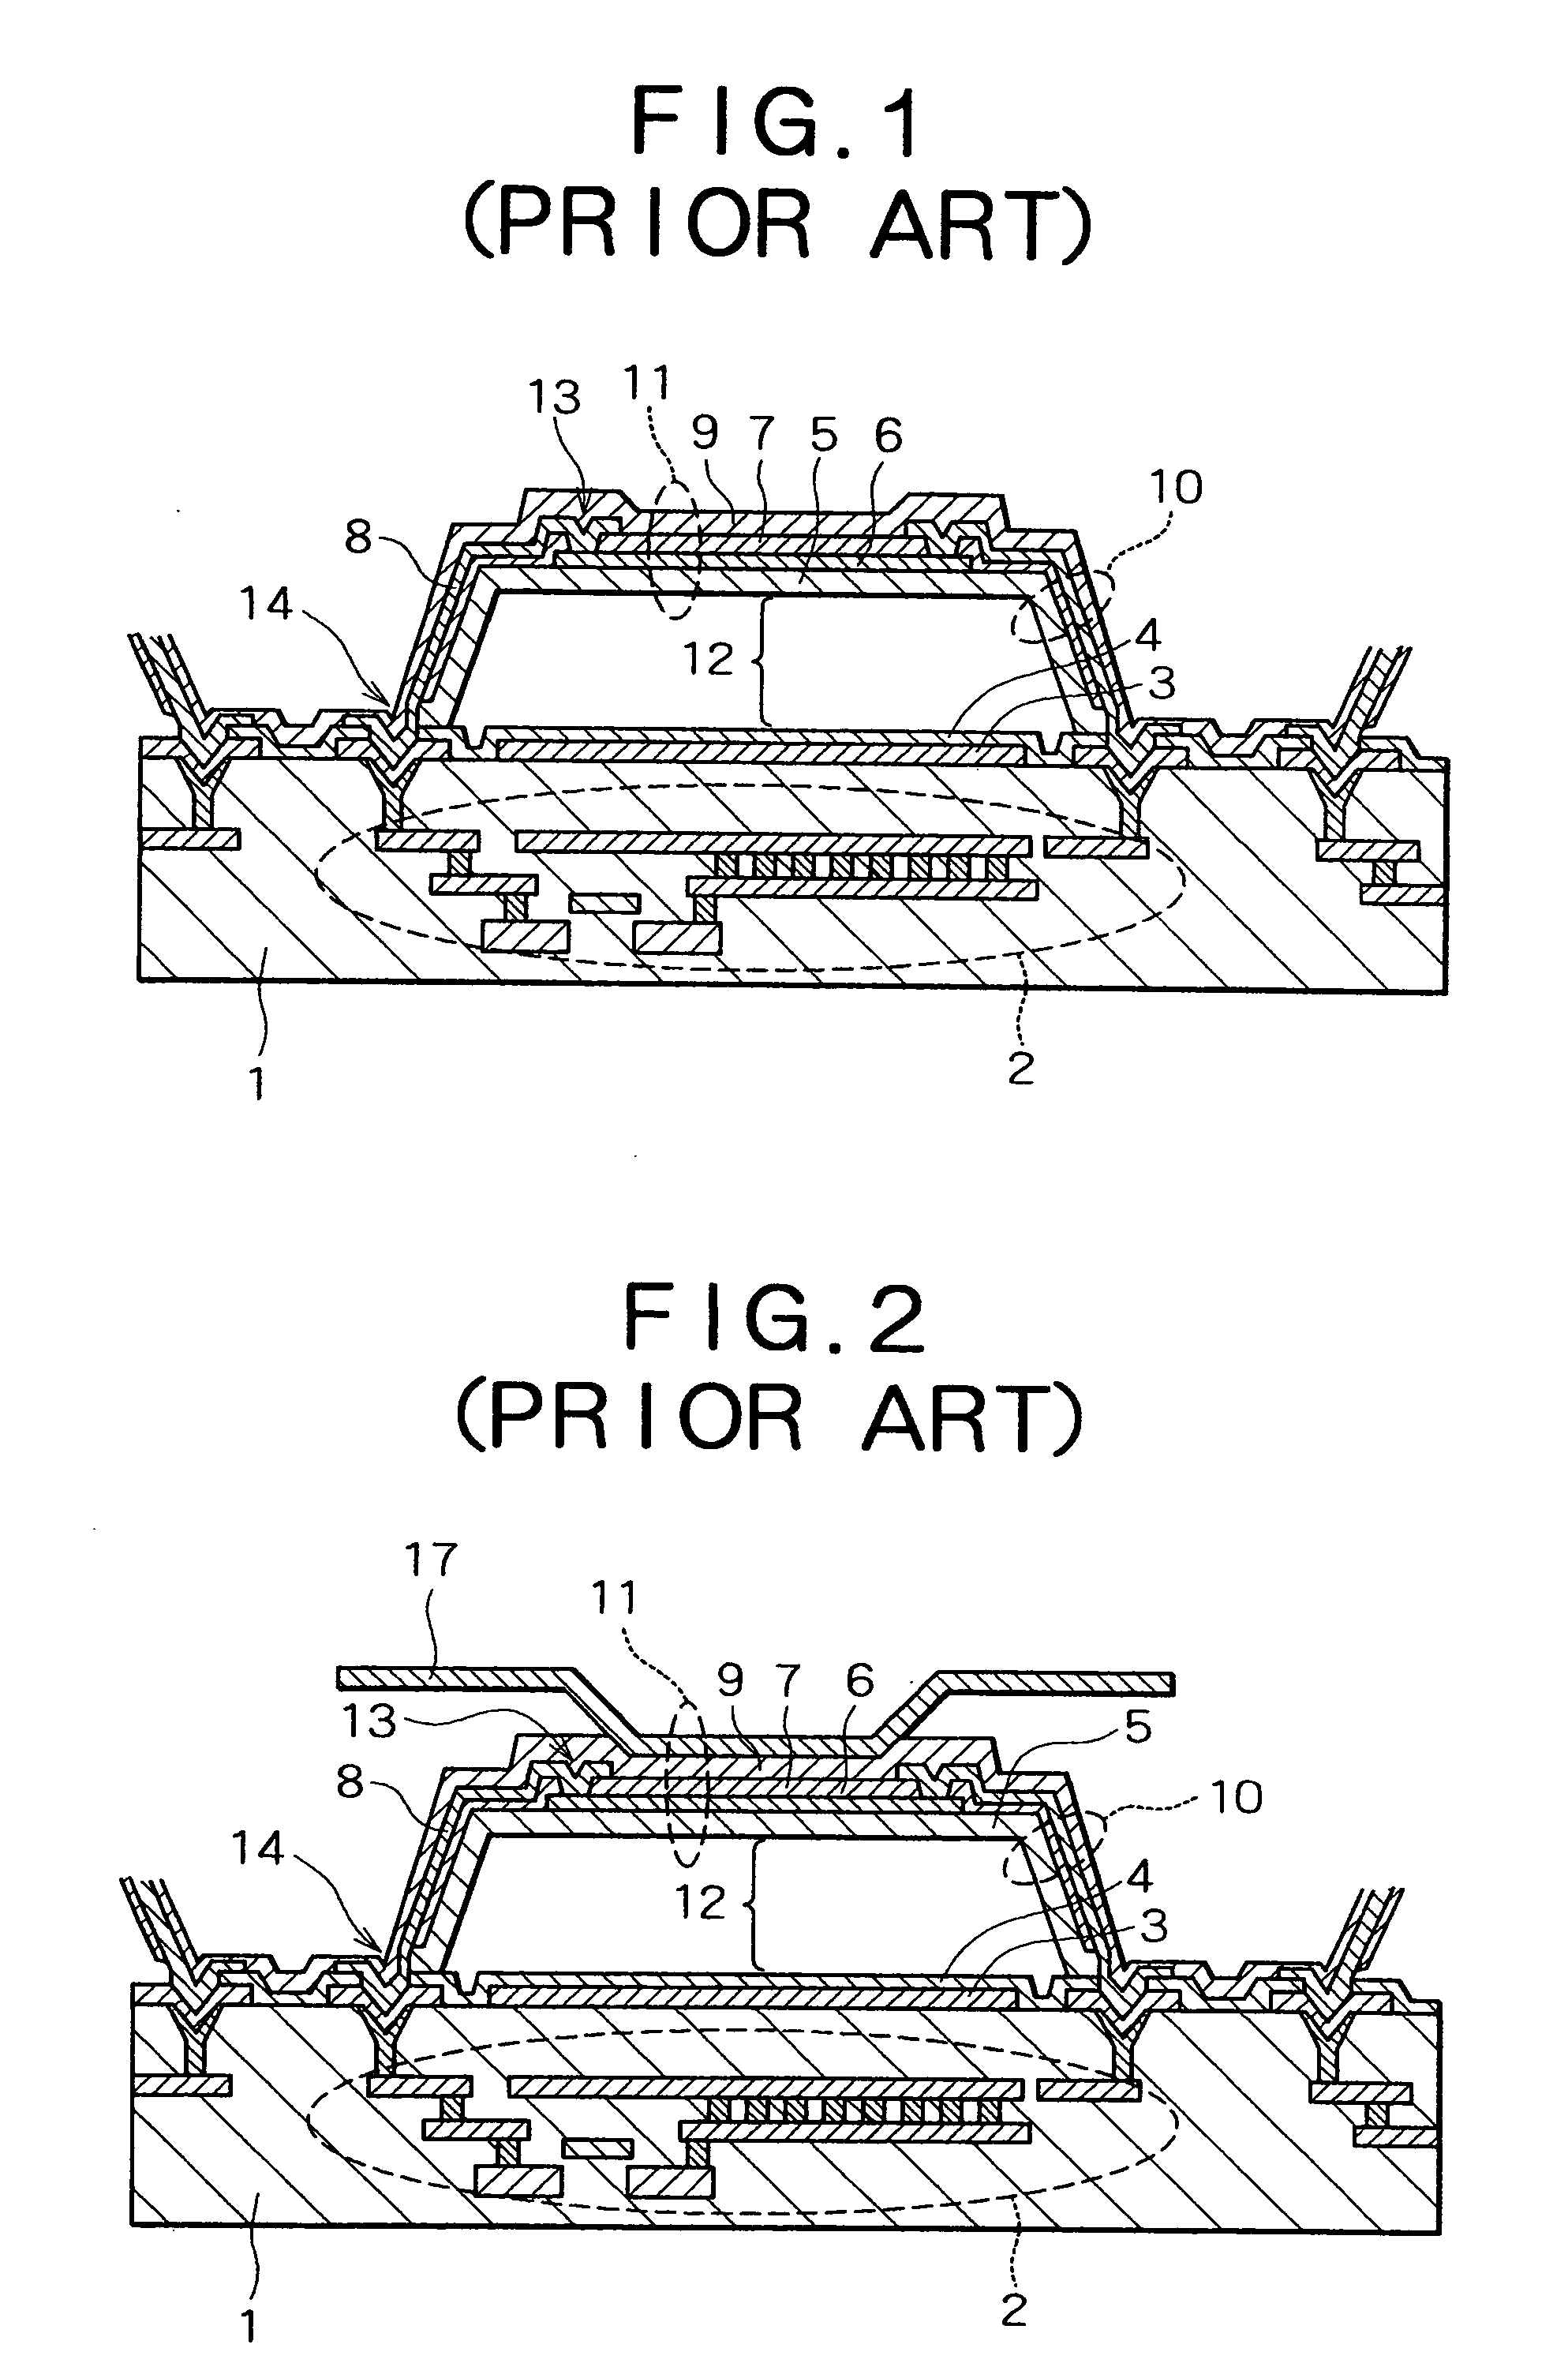 Thermal-type infrared detection element